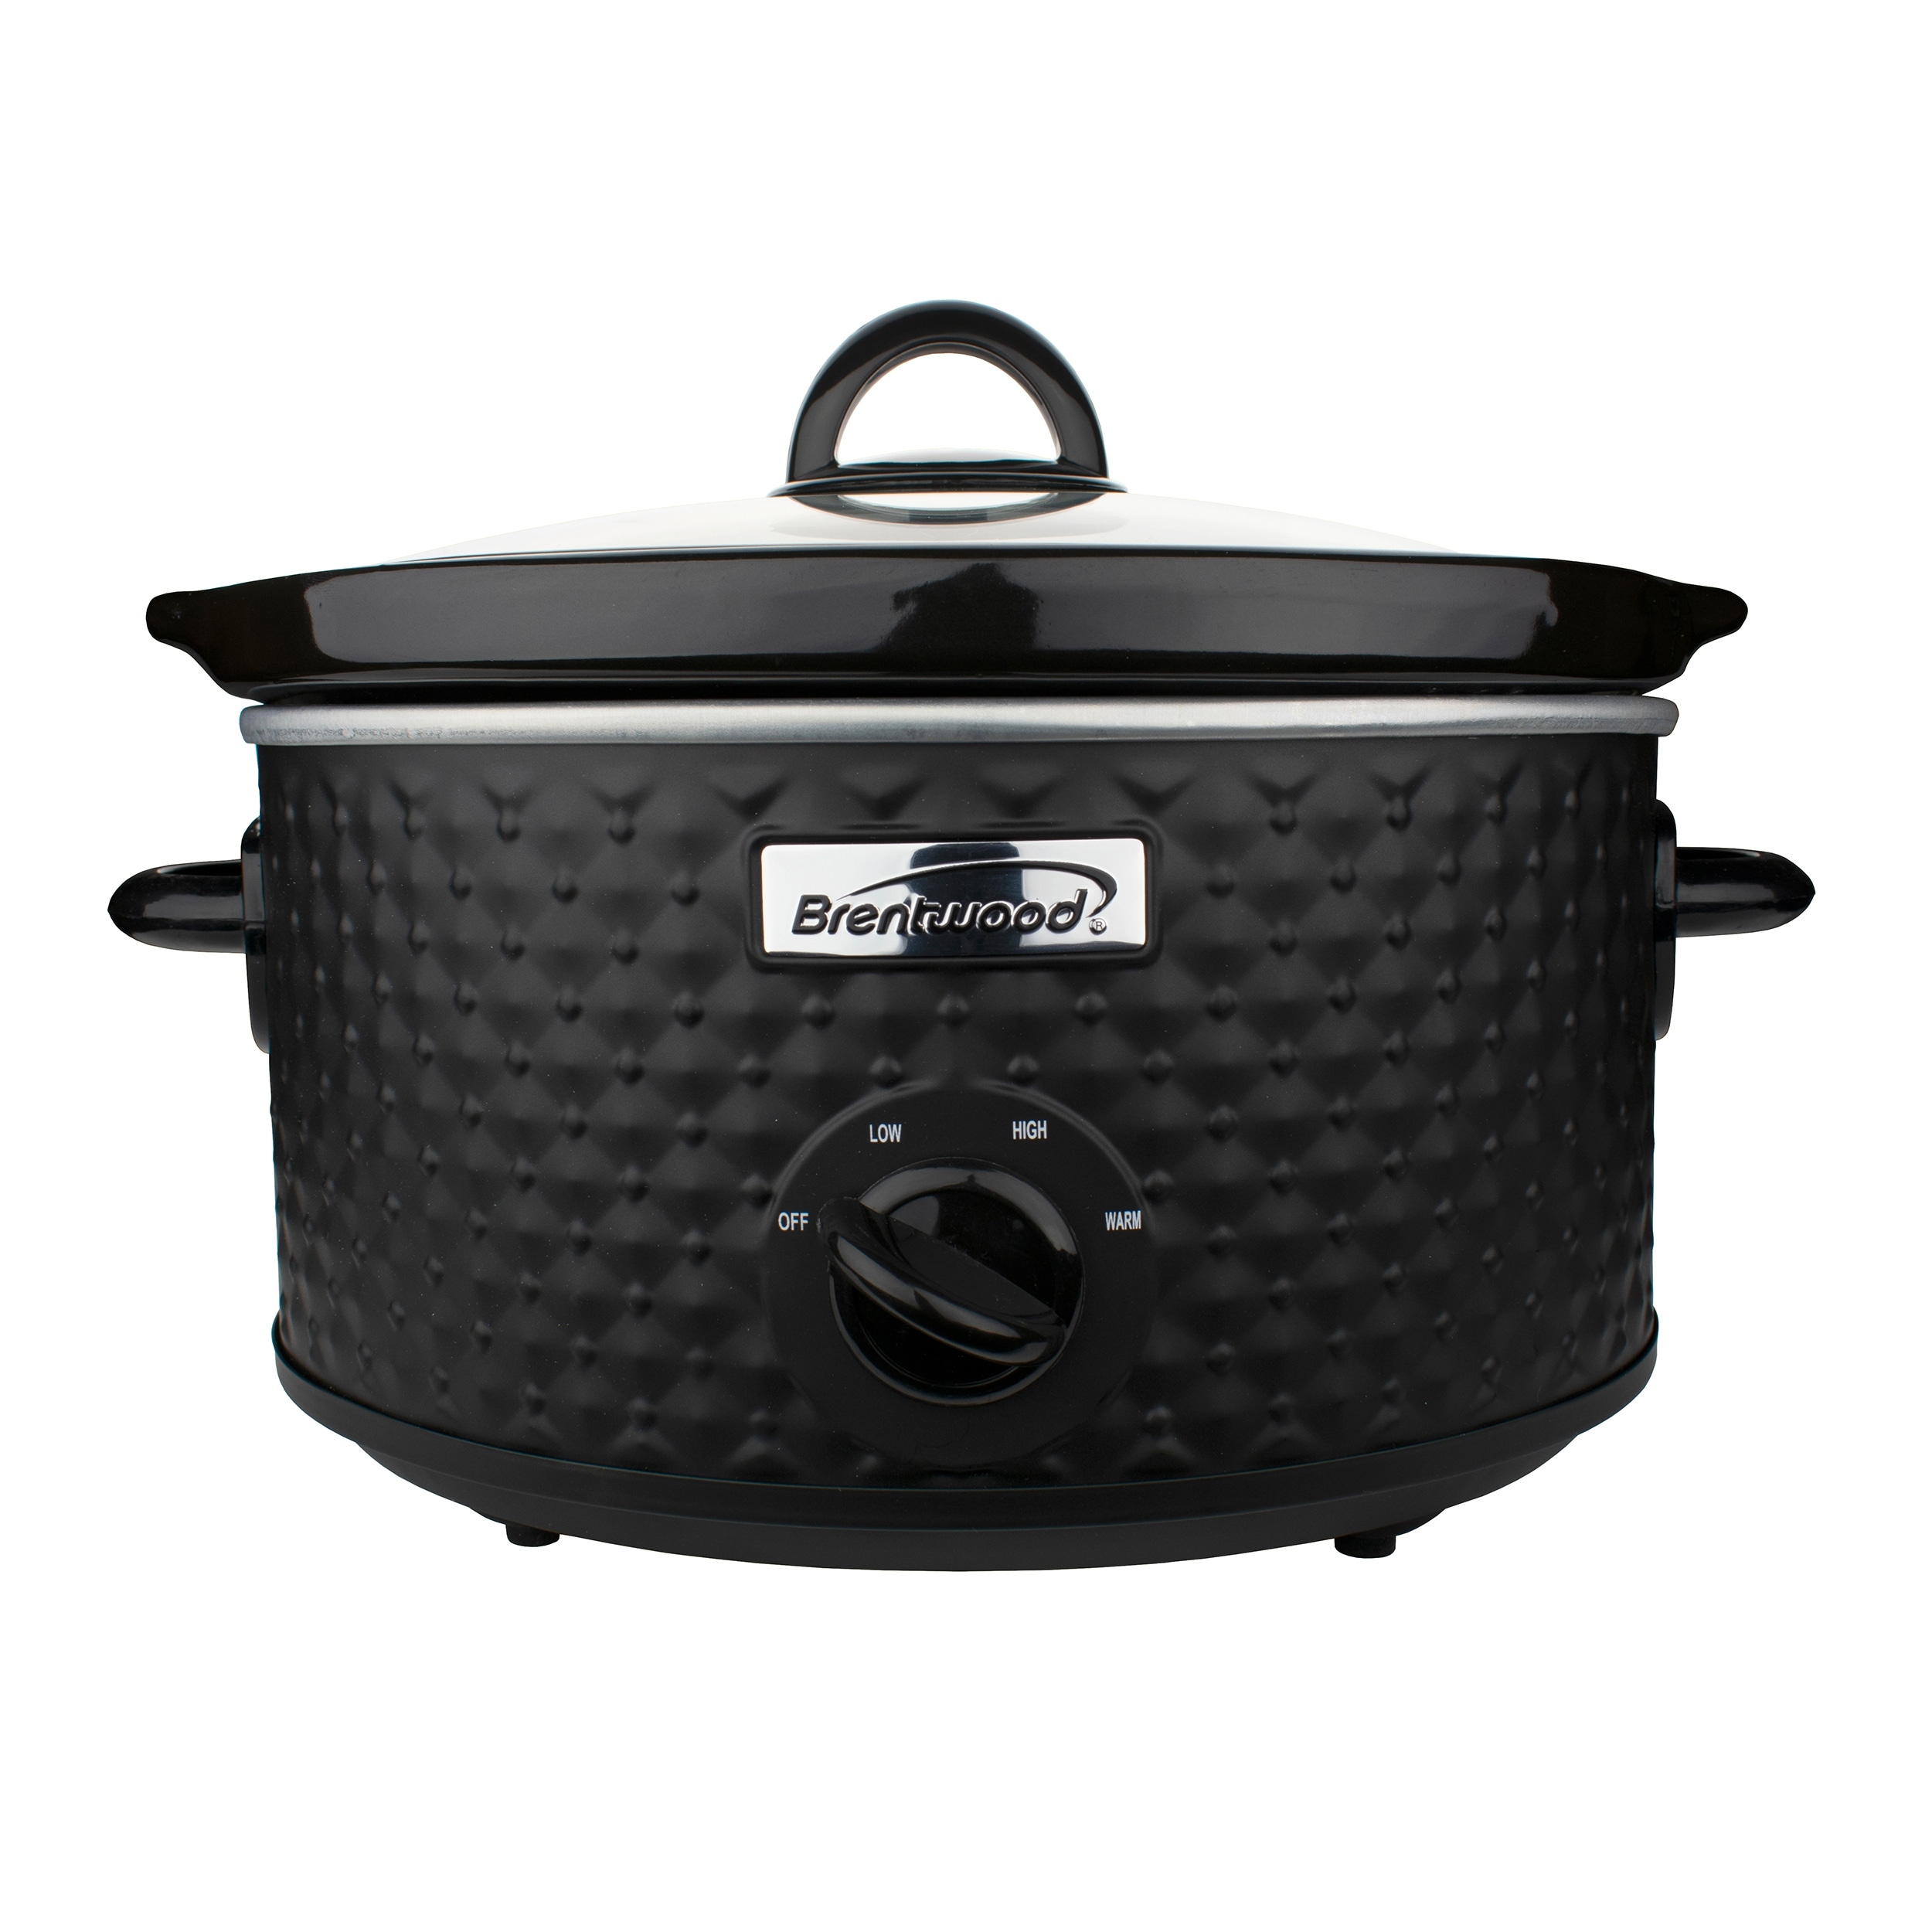 https://ak1.ostkcdn.com/images/products/is/images/direct/cde1146f6cb09a152bc592242484cceedfa4af74/Brentwood-3.5-Quart-Diamond-Pattern-Slow-Cooker-in-Black.jpg